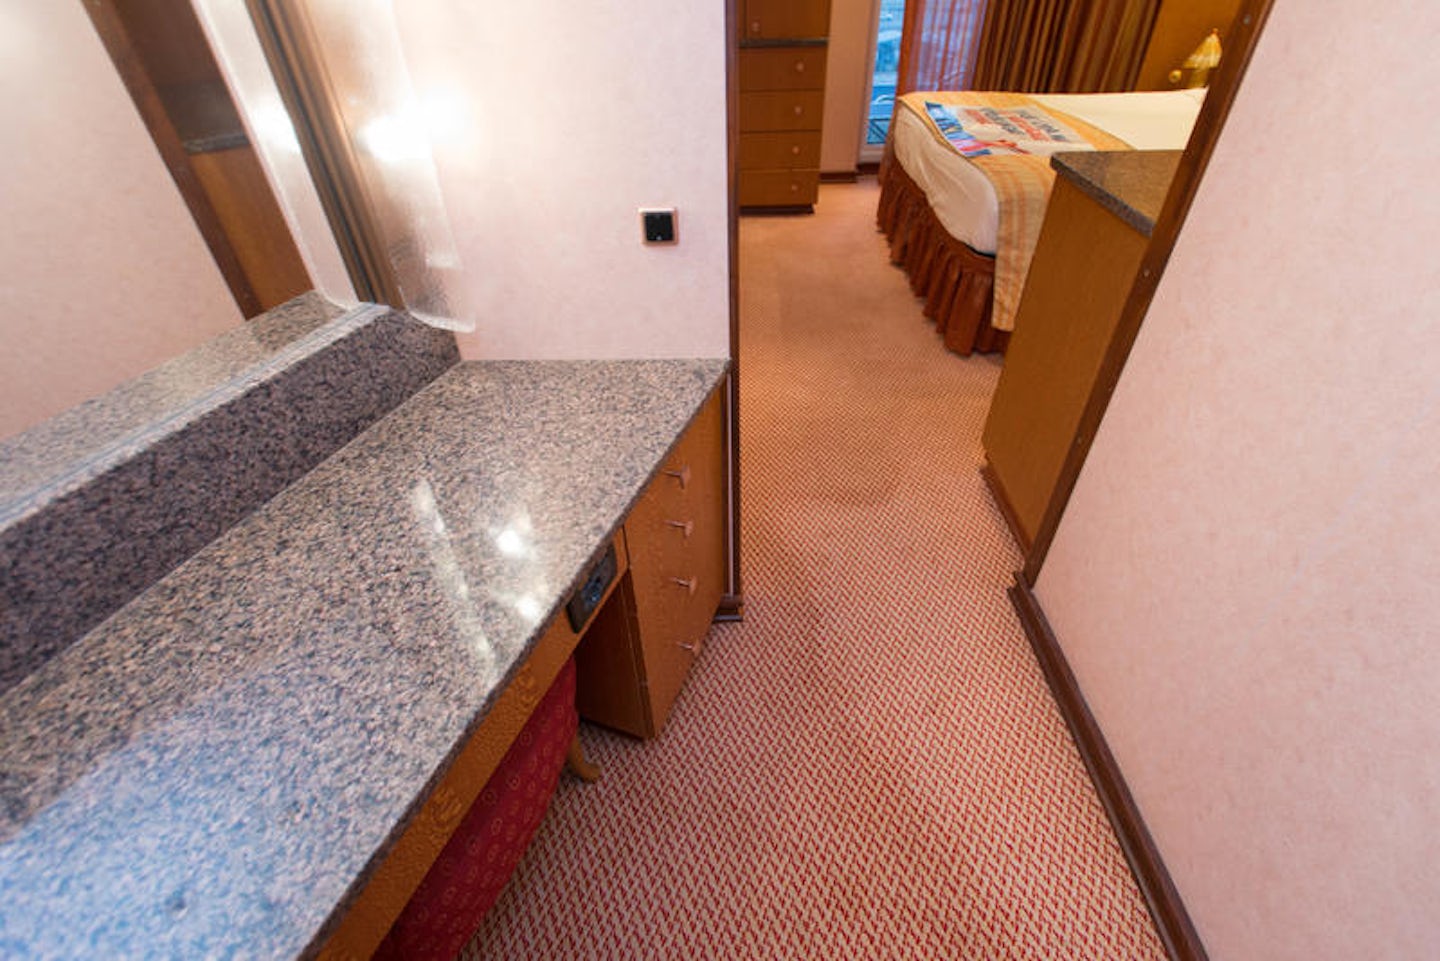 The Grand Suite on Carnival Pride